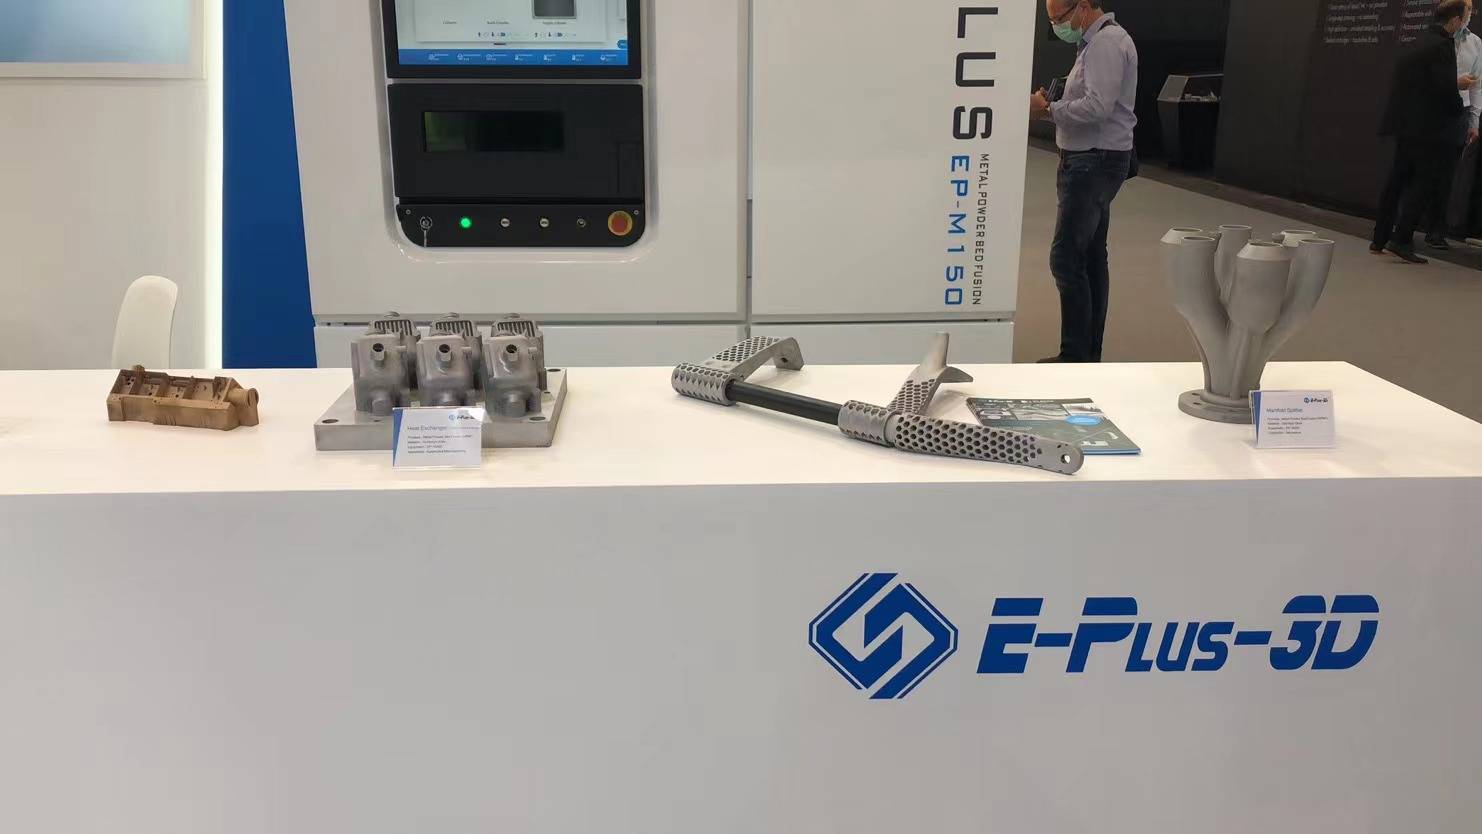 Exhibits from Eplus3D in Formnext 2021